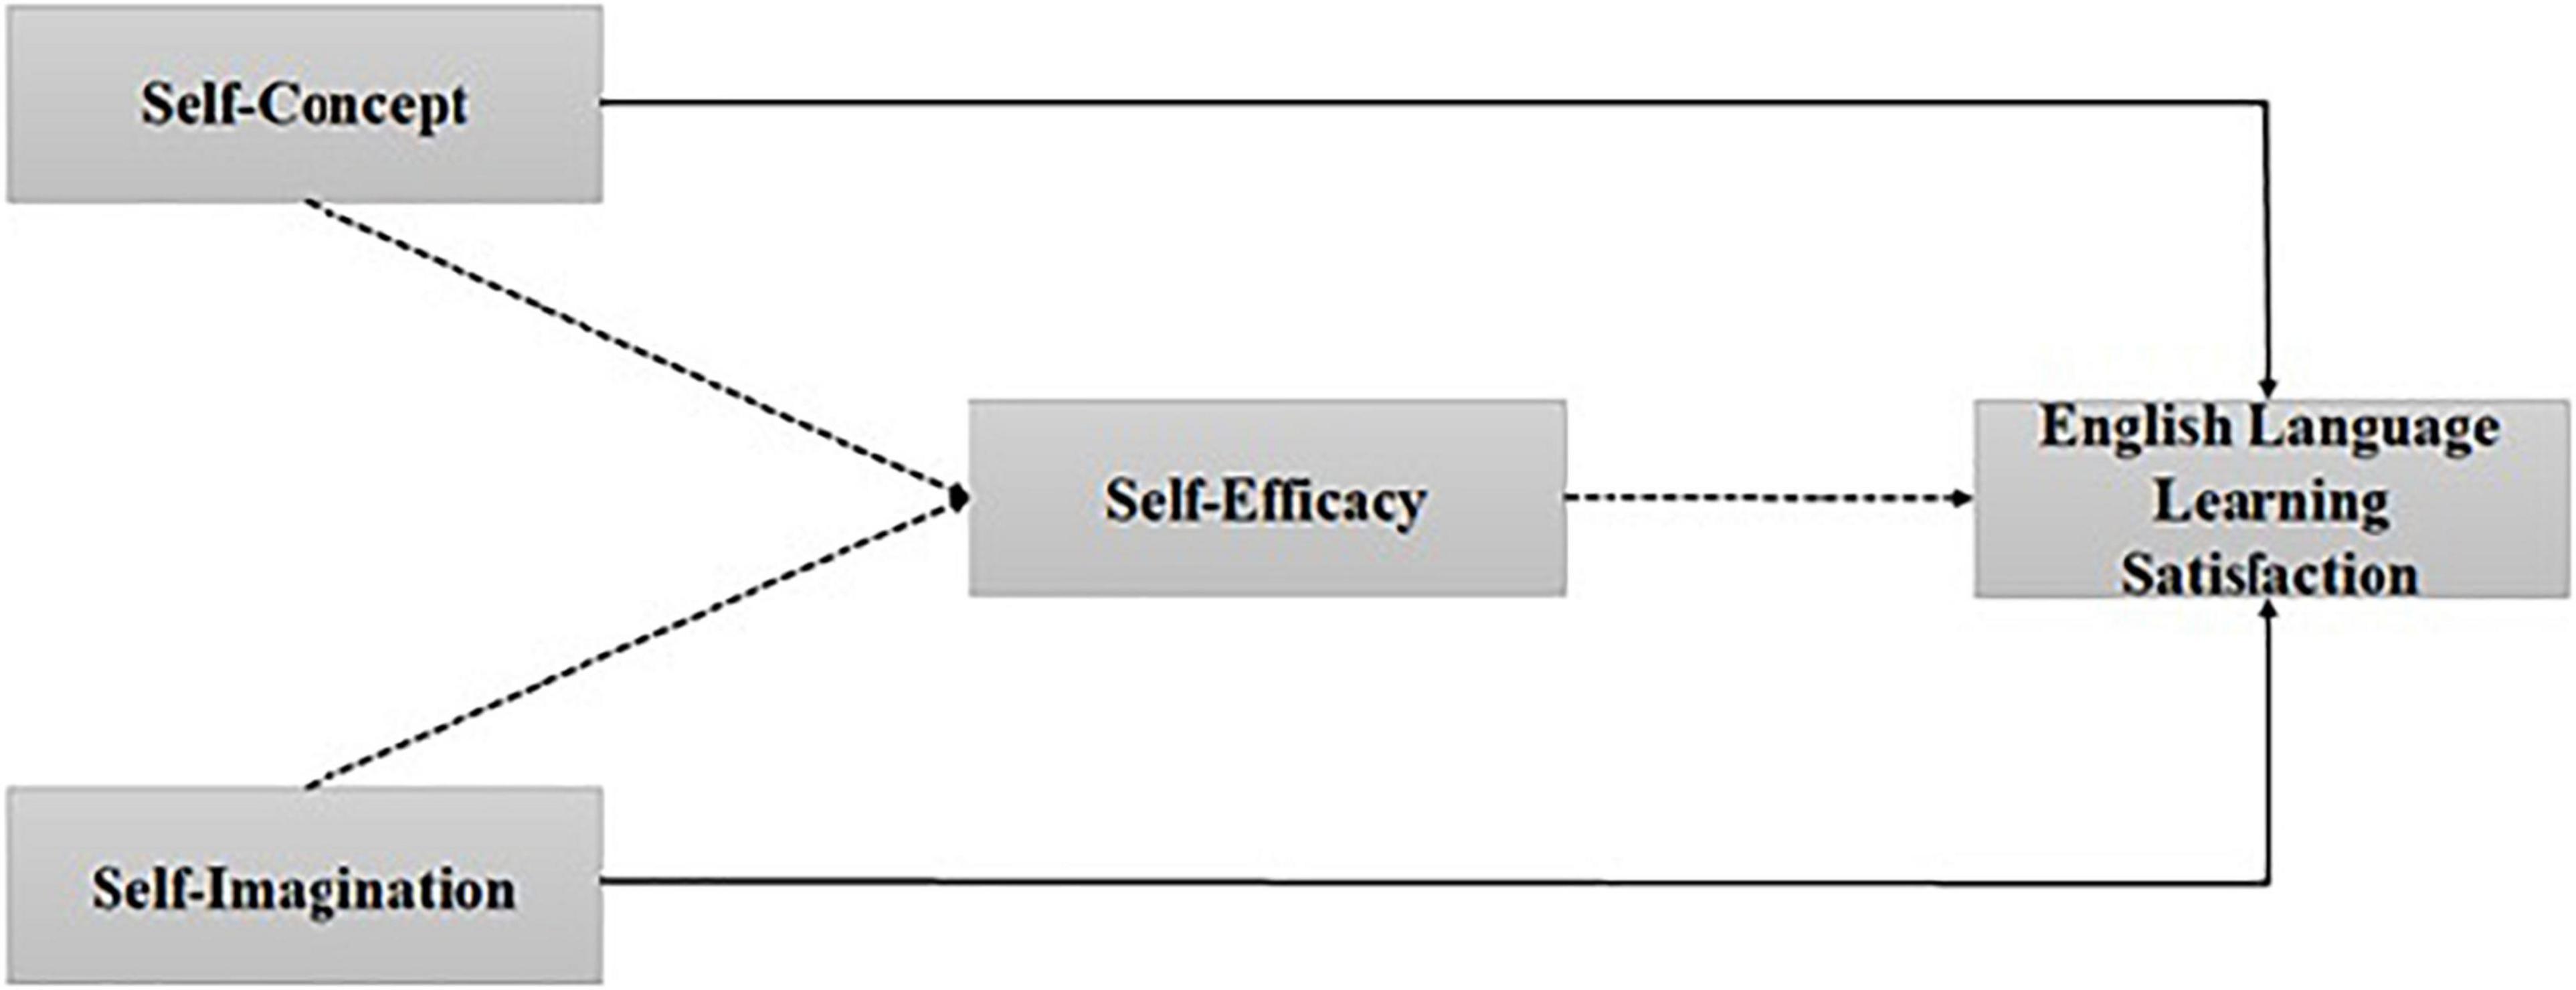 How gender influences the effect of age on self‐efficacy and